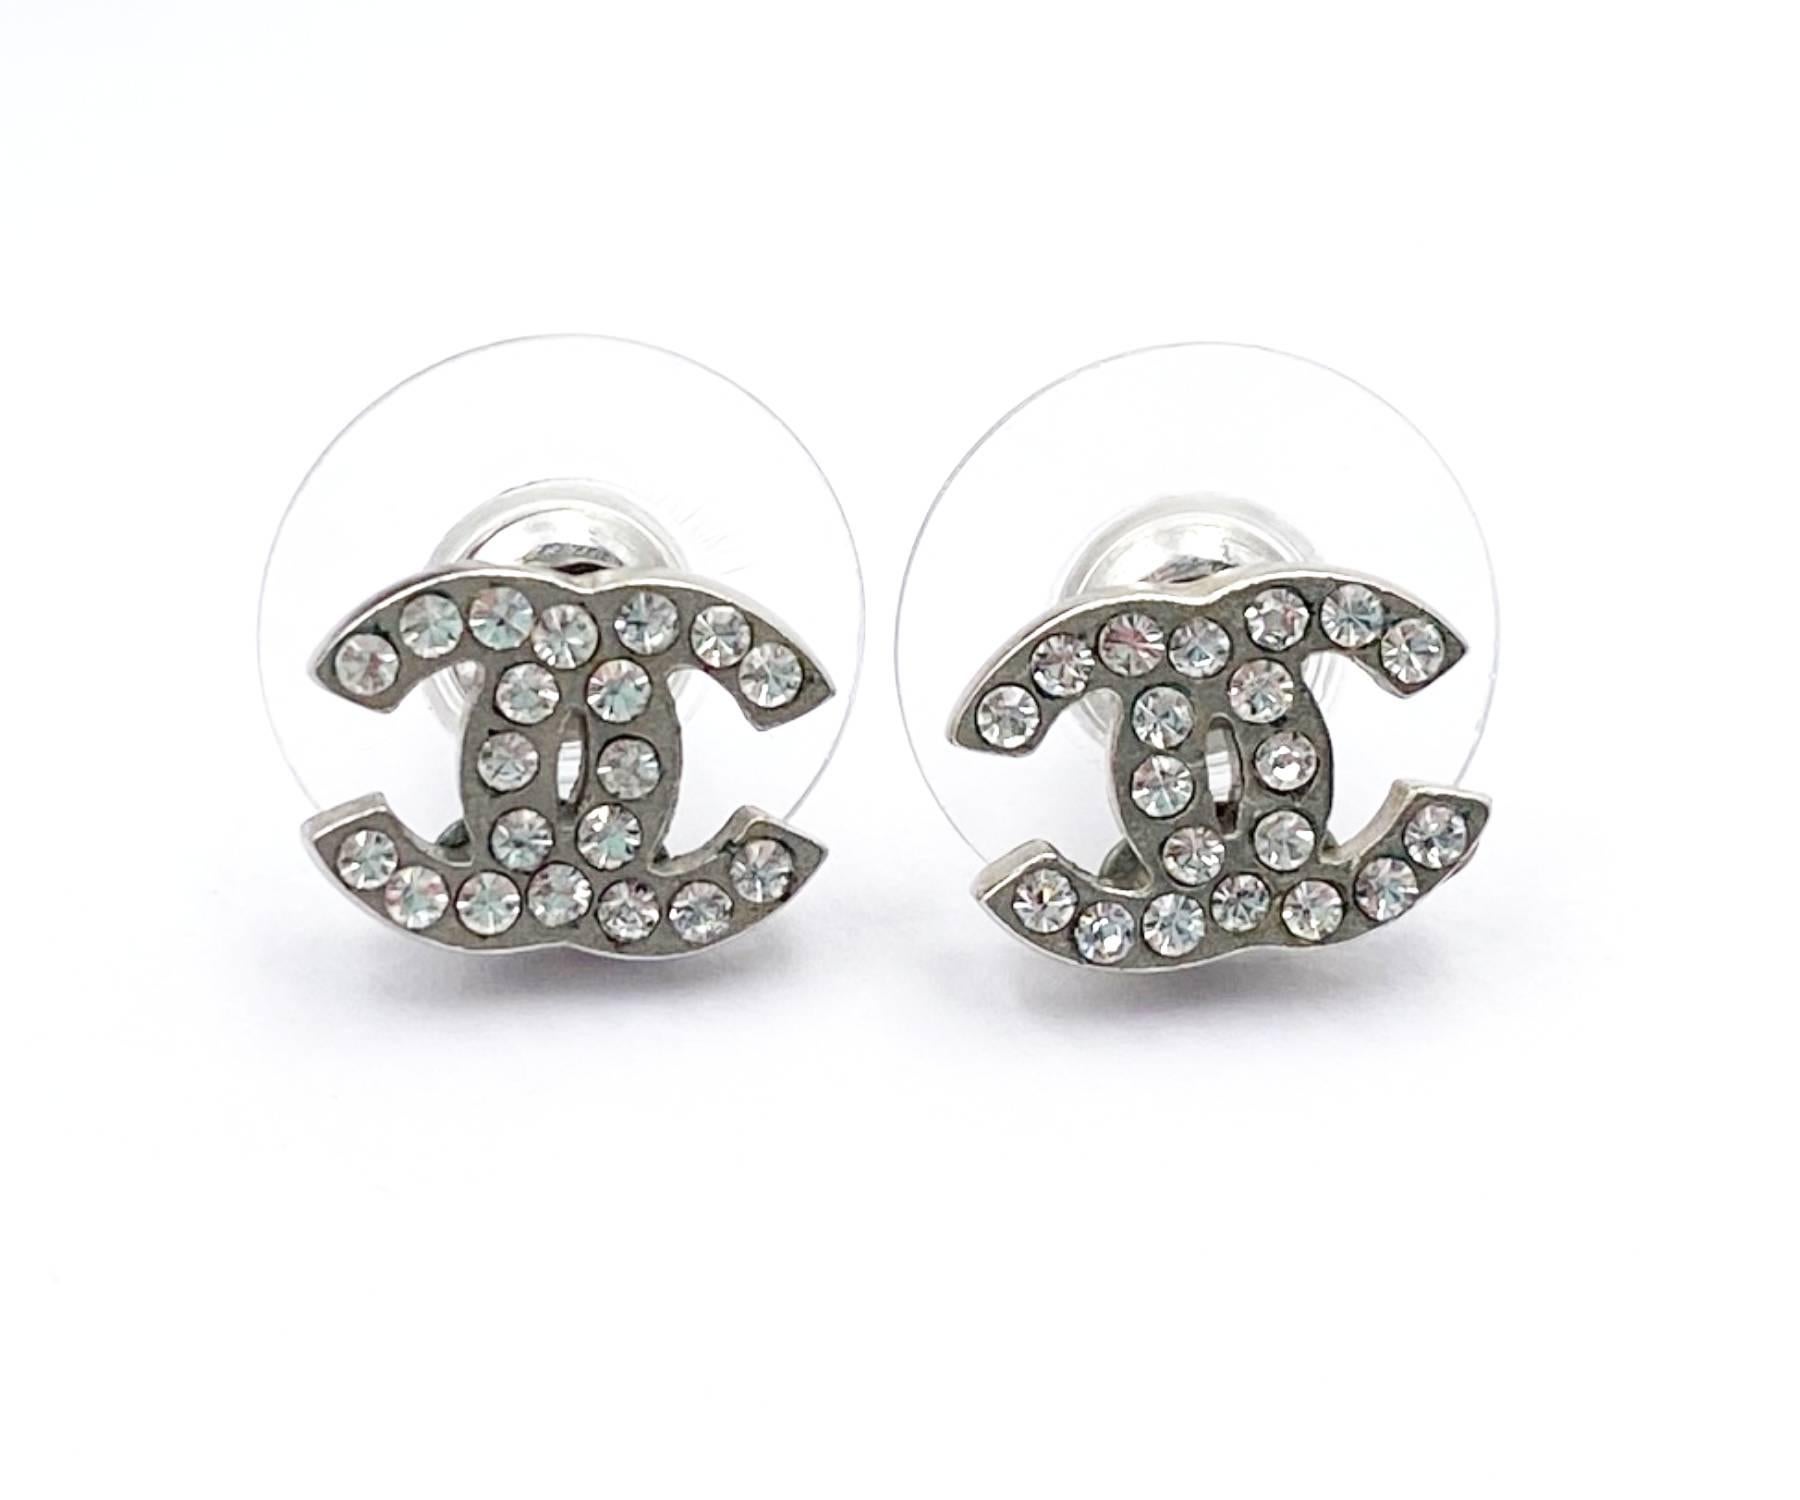 Chanel Classic Silver CC Crystal Small Piercing Earrings

*Marked 09
*Made in France
*Comes with the original dustbag

-It is approximately 0.3